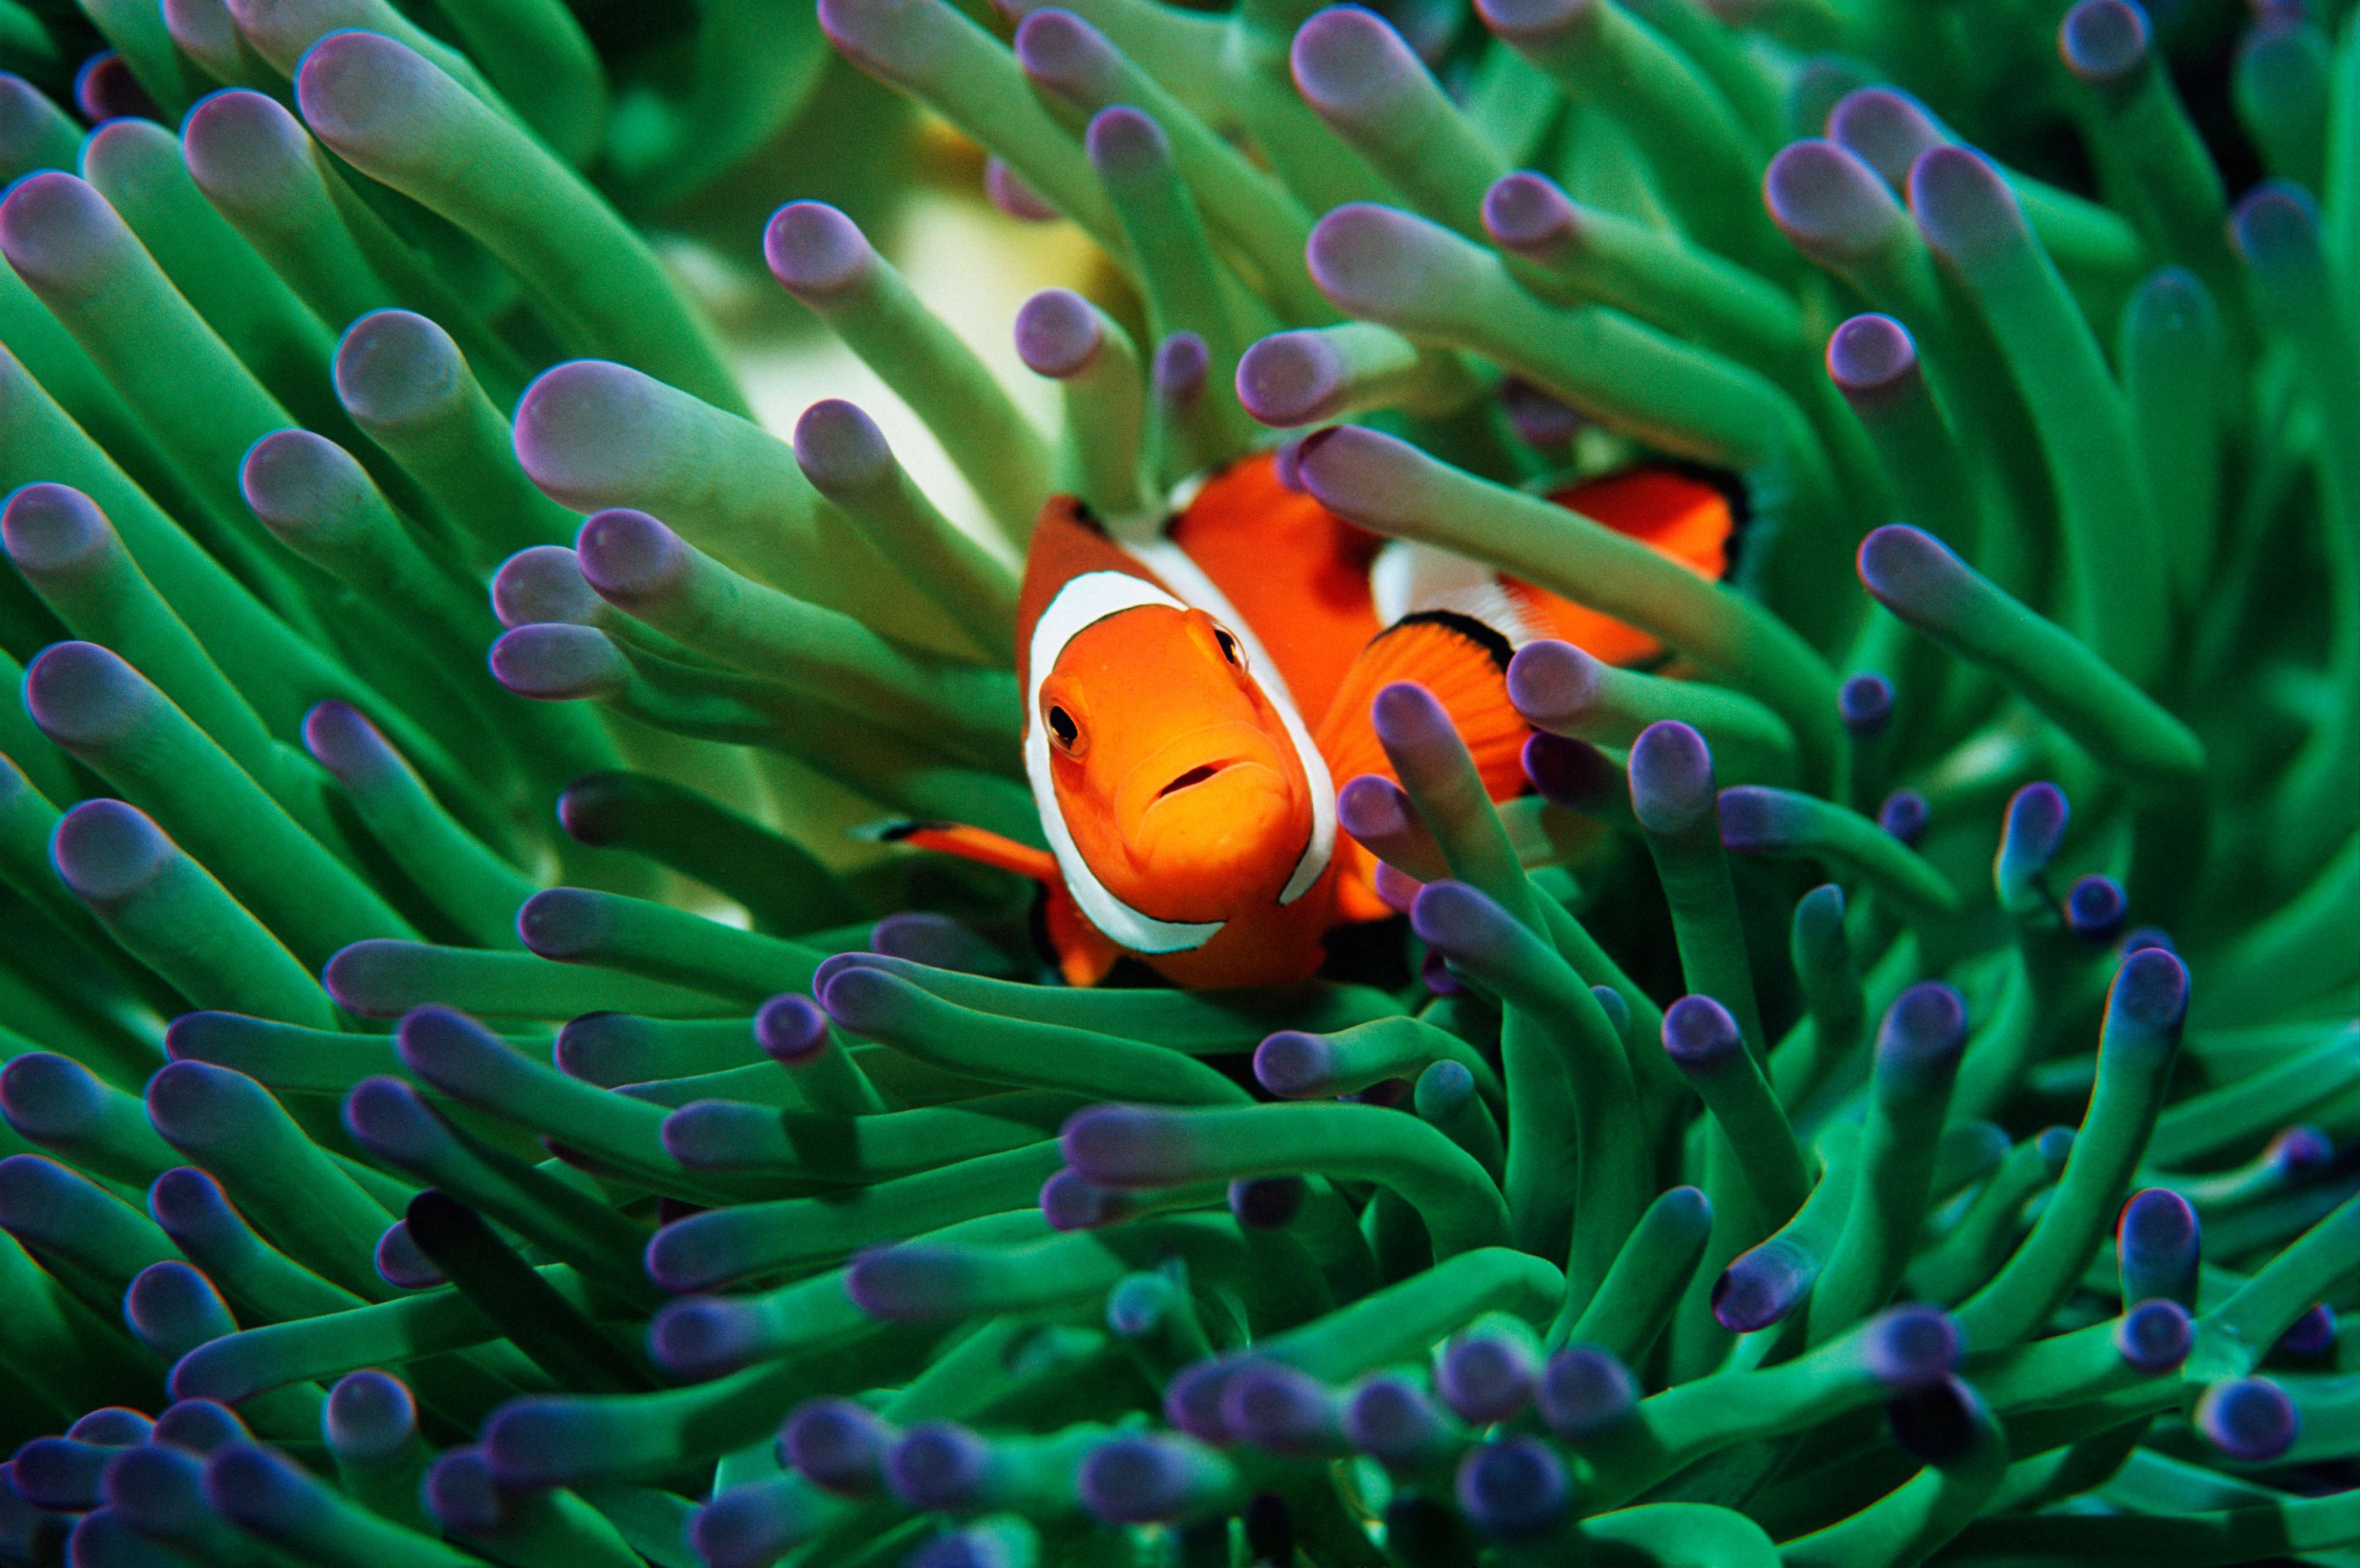 What Is The Relationship Between Clownfish And Sea Anemone